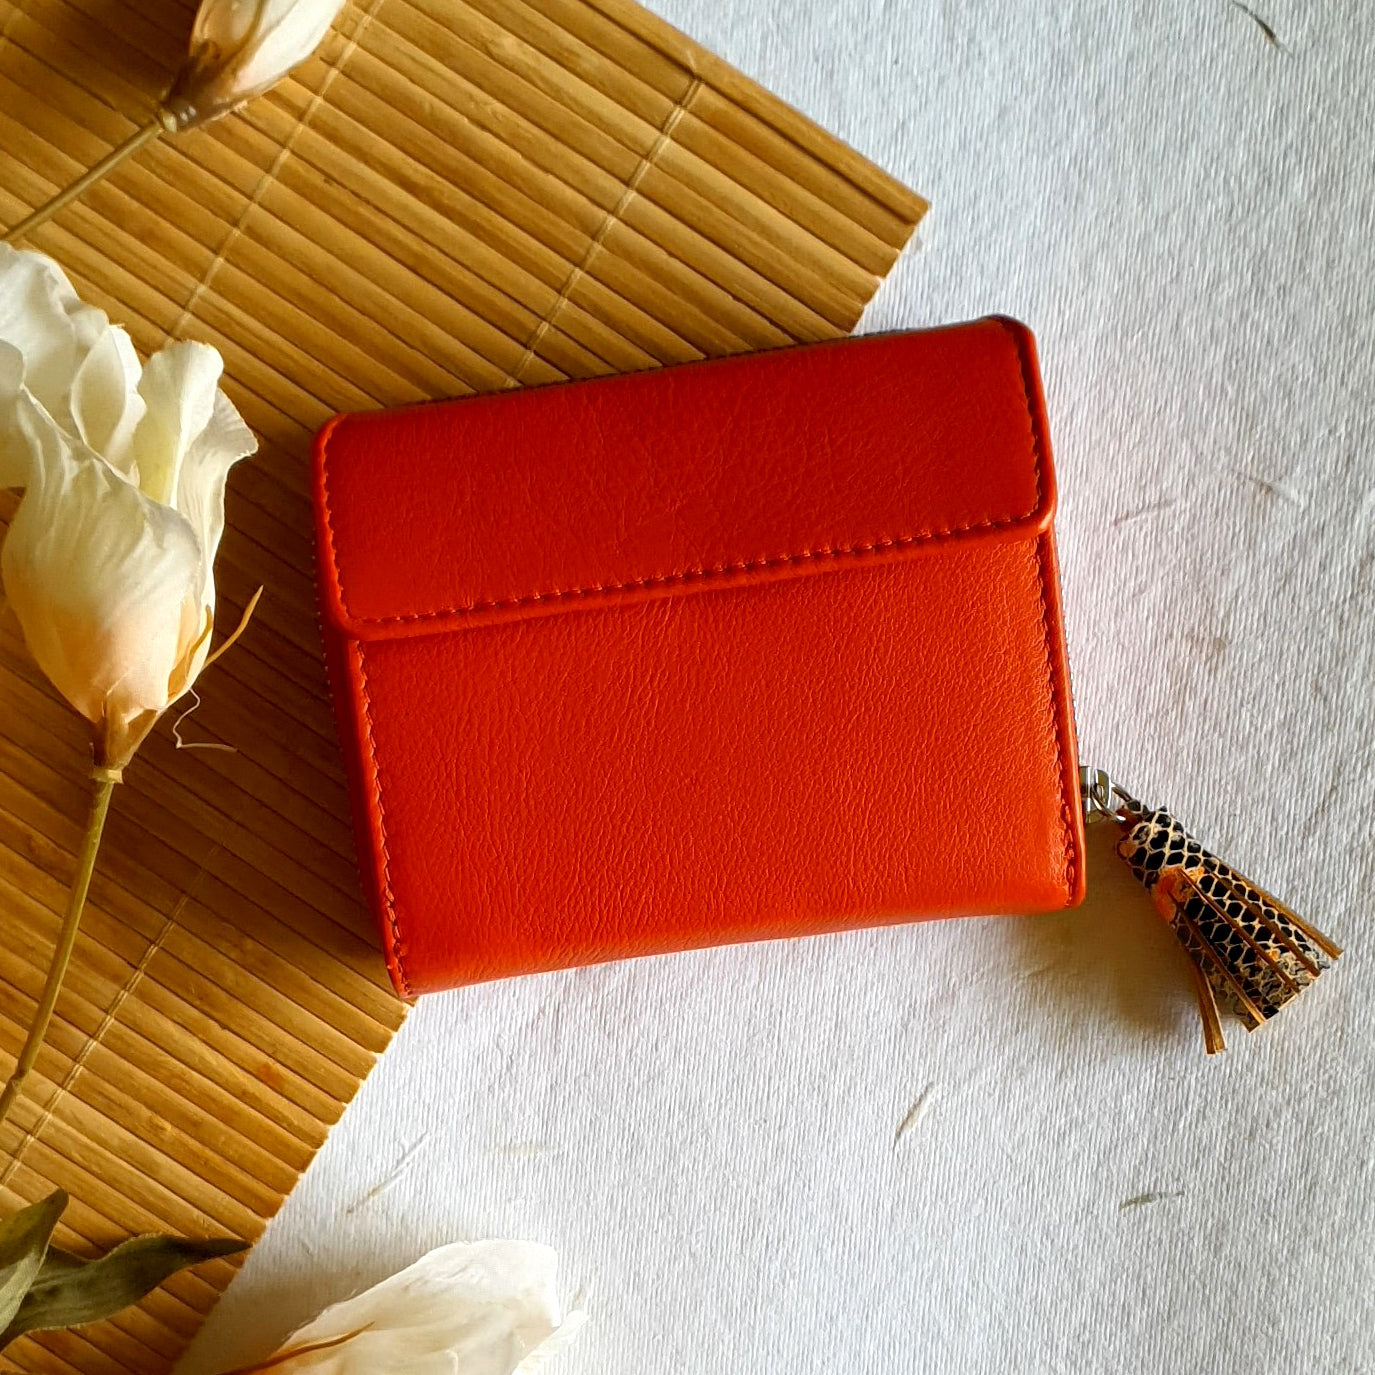 Wallet- Orange at Kamakhyaa by Noupelle. This item is Bags, Casual Wear, Free Size, Less than $50, Natural, Not Priced, Solids, Upcycled, Upcycled leather, Wallets